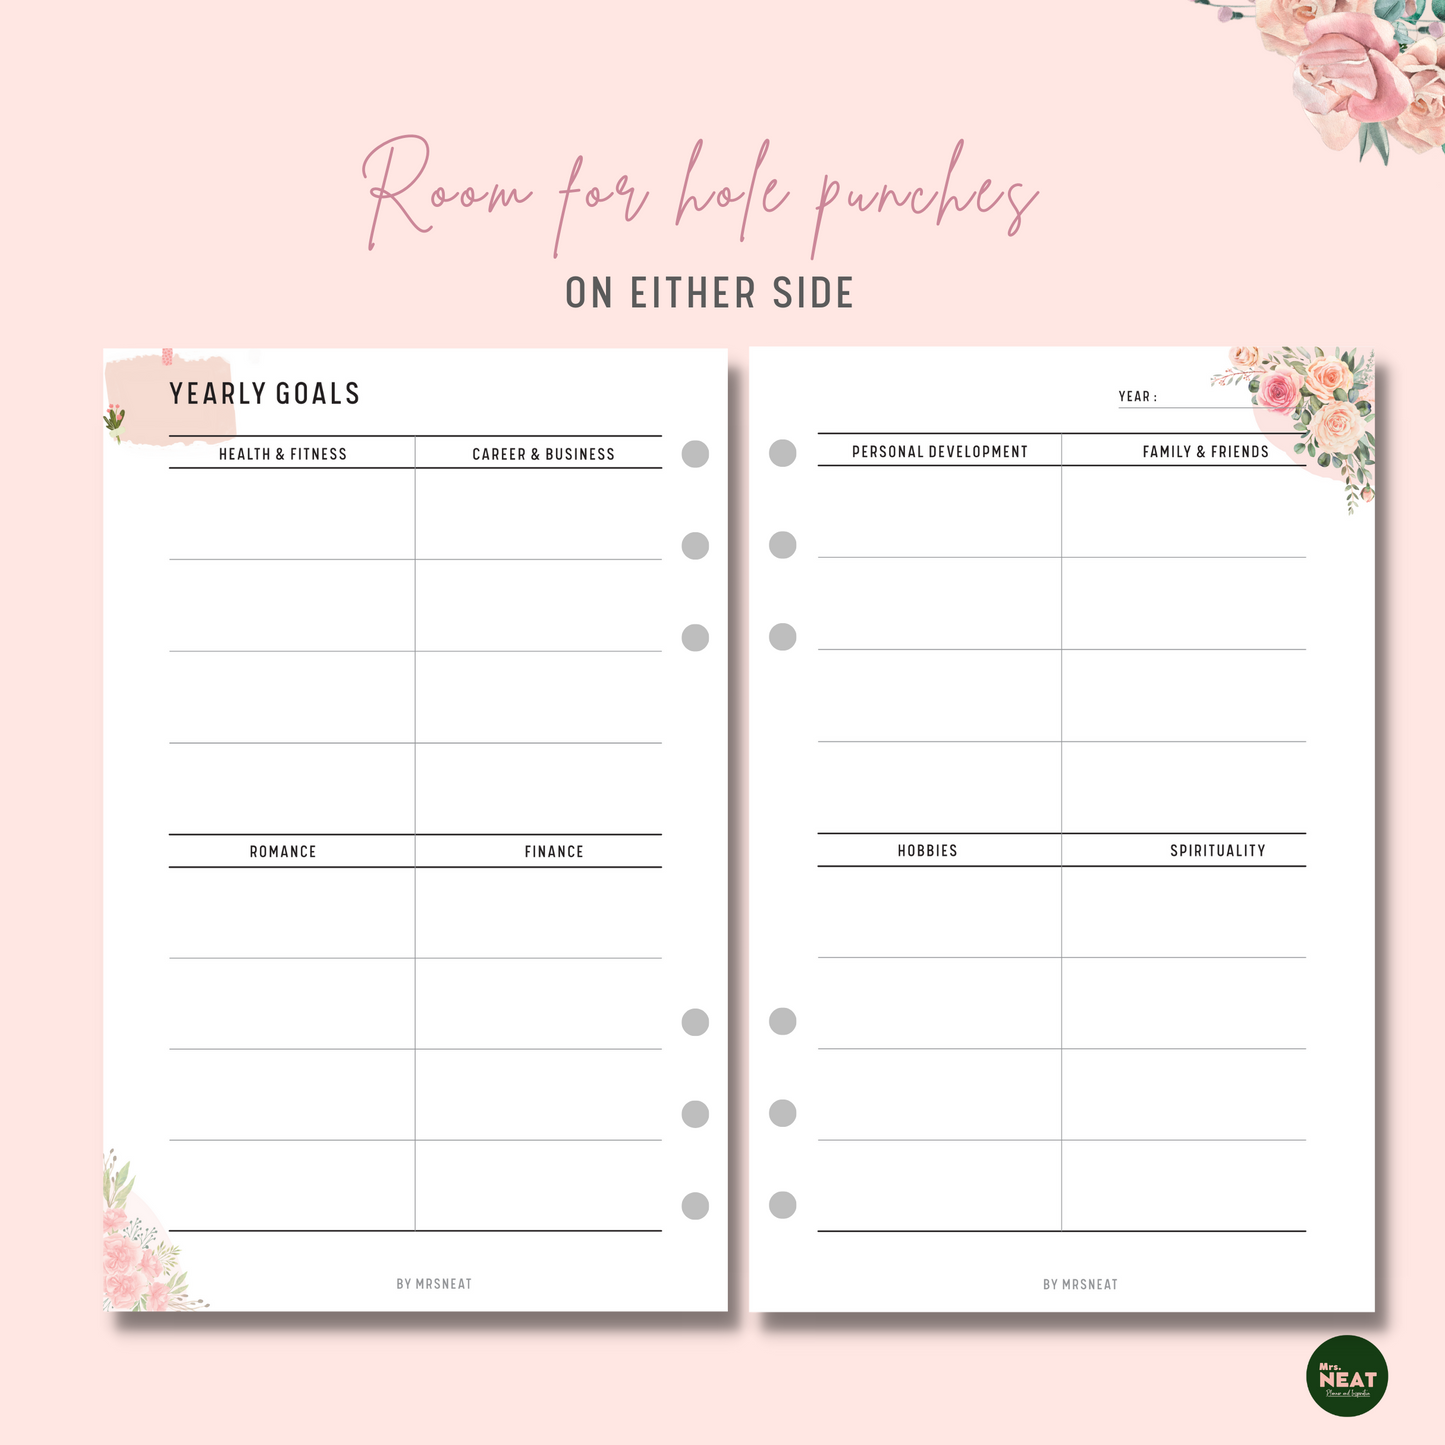 Beautiful Floral 8 Areas of life goal planner for Yearly Goals with room for hole punches